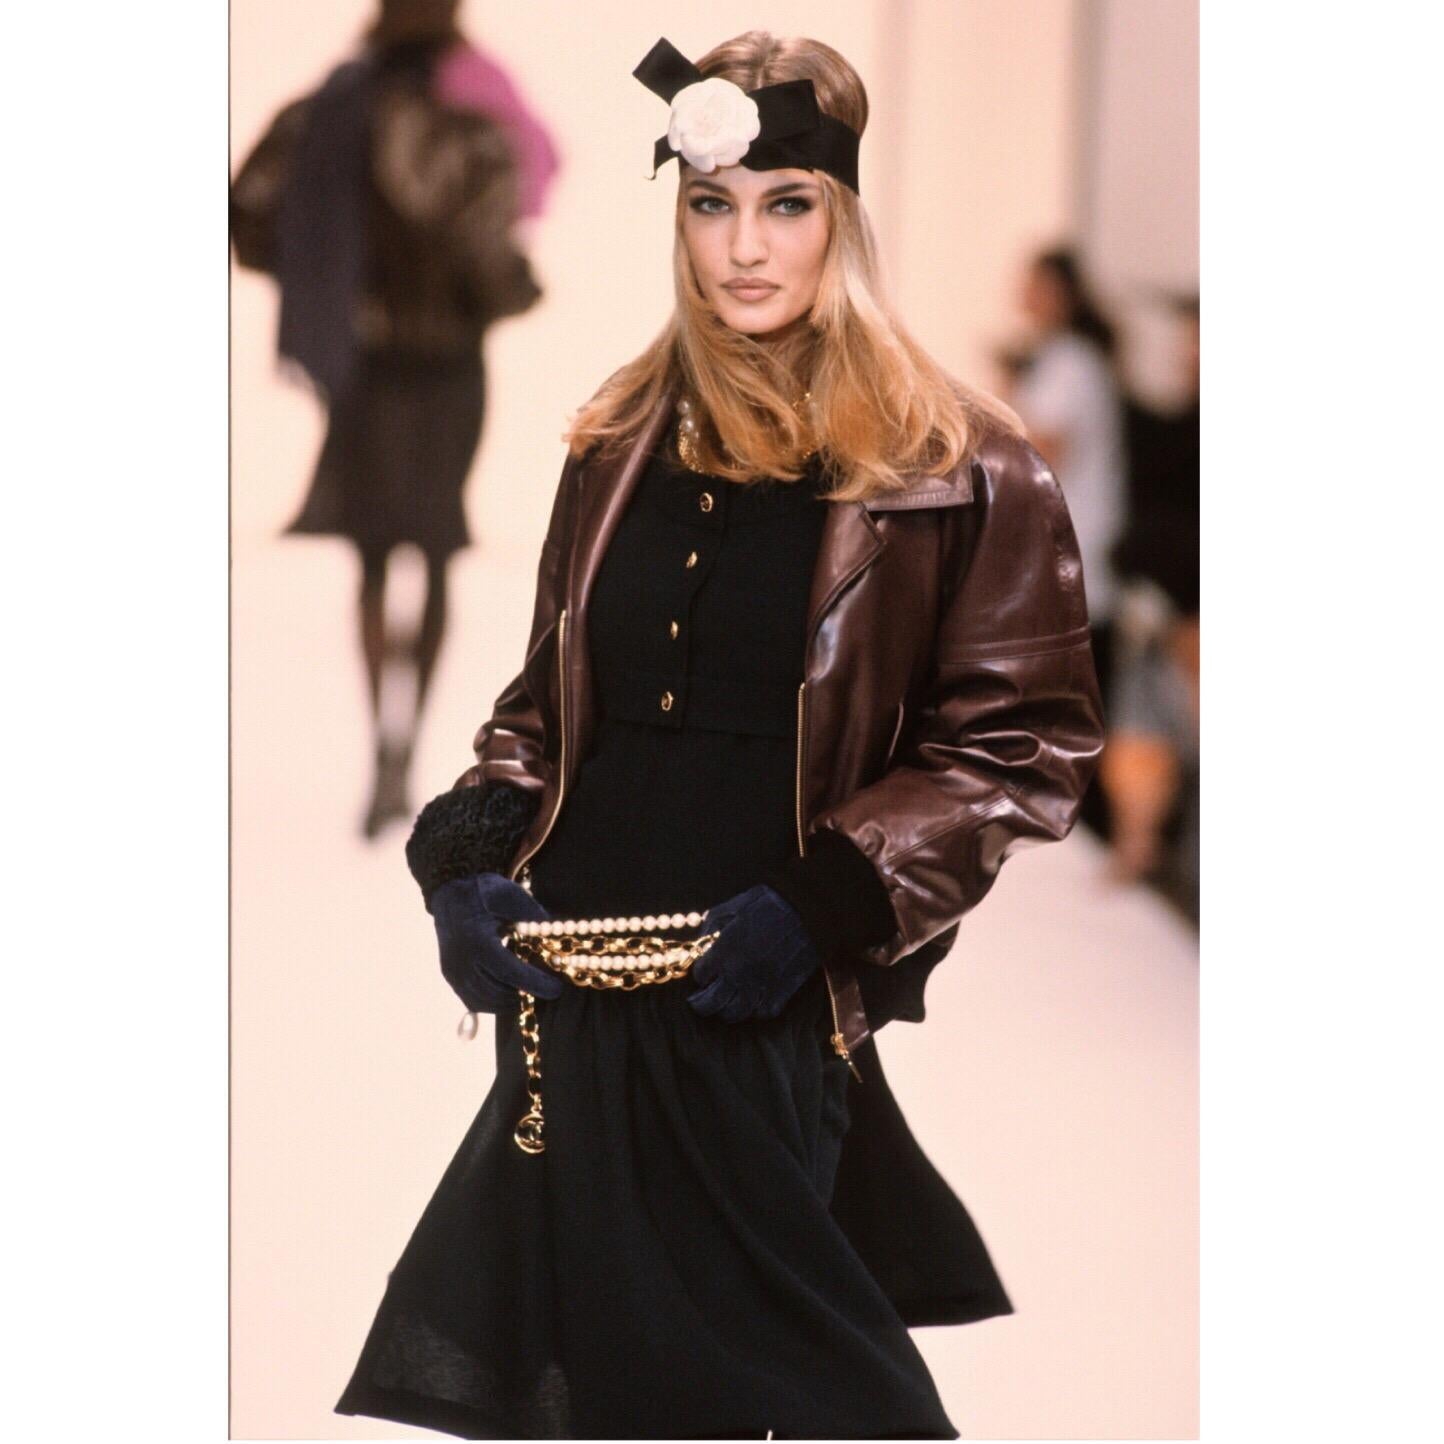 Chanel is known to keep to its roots. Alongside new, trendy styles, the house usually puts an emphasis on its timeless tweeds and silhouettes and rarely works in leather. However, the Fall 1991 collection explored a new side of Chanel that showcased